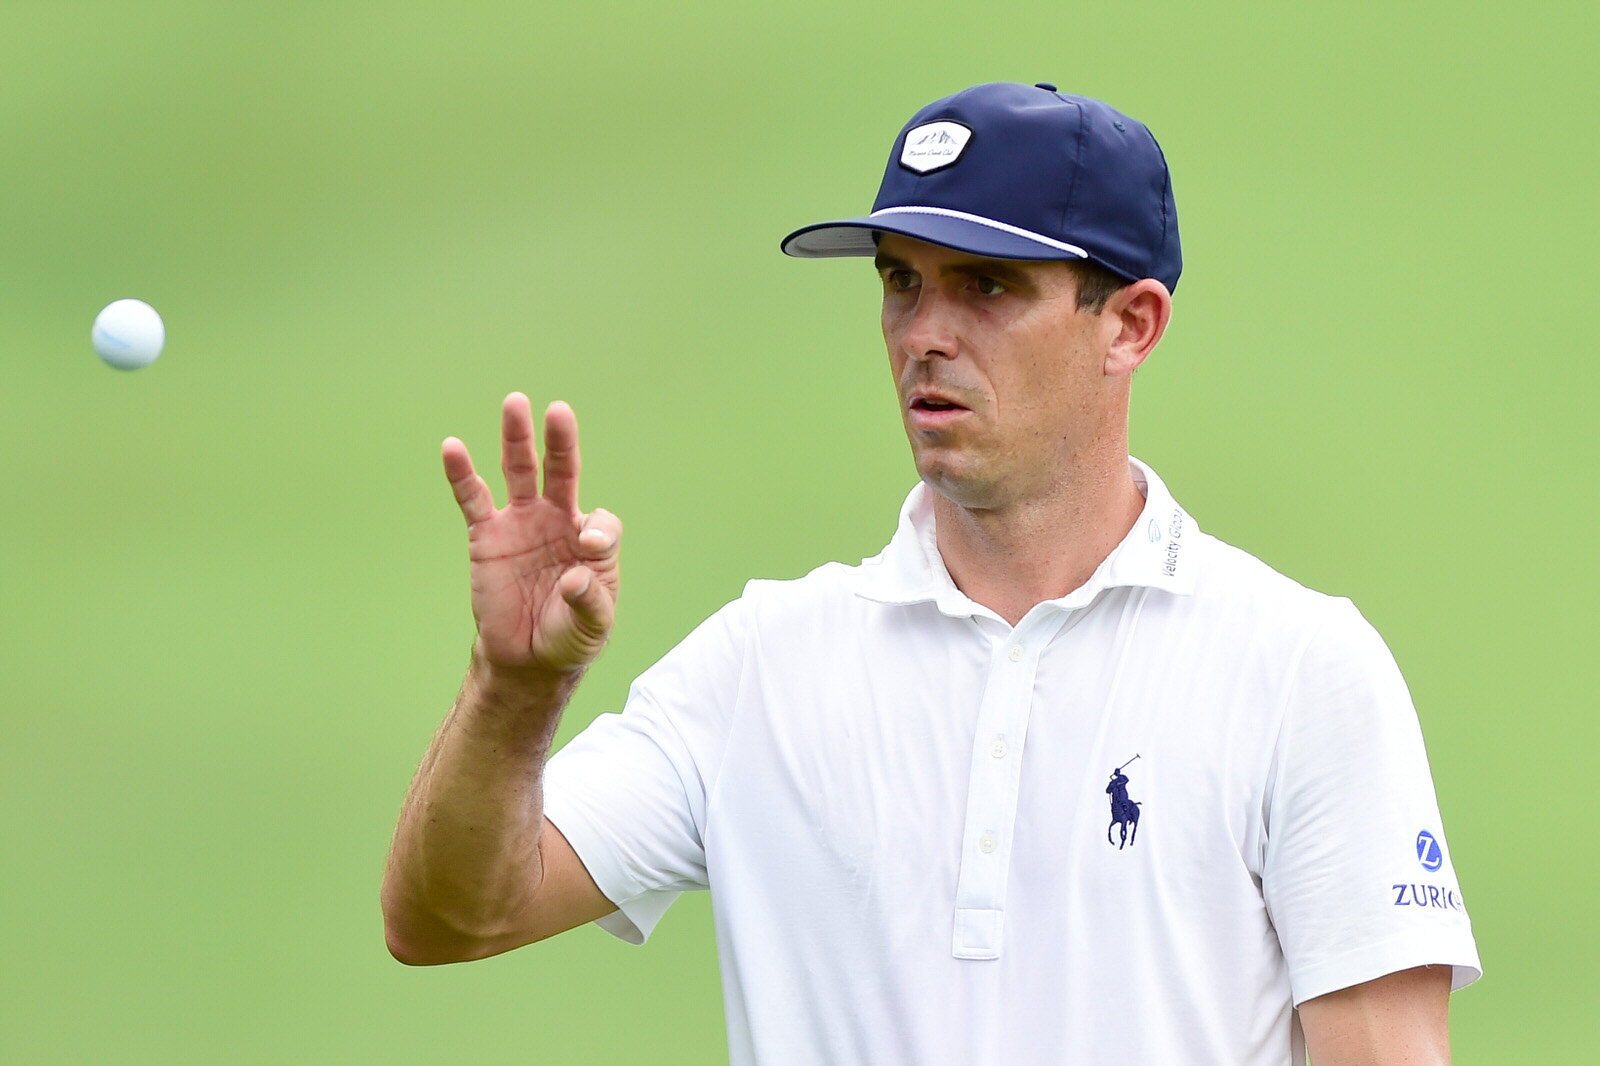  GREENSBORO, NORTH CAROLINA - AUGUST 15: Billy Horschel of the United States catches his ball on the 18th green during the third round of the Wyndham Championship at Sedgefield Country Club on August 15, 2020 in Greensboro, North Carolina. (Photo by 